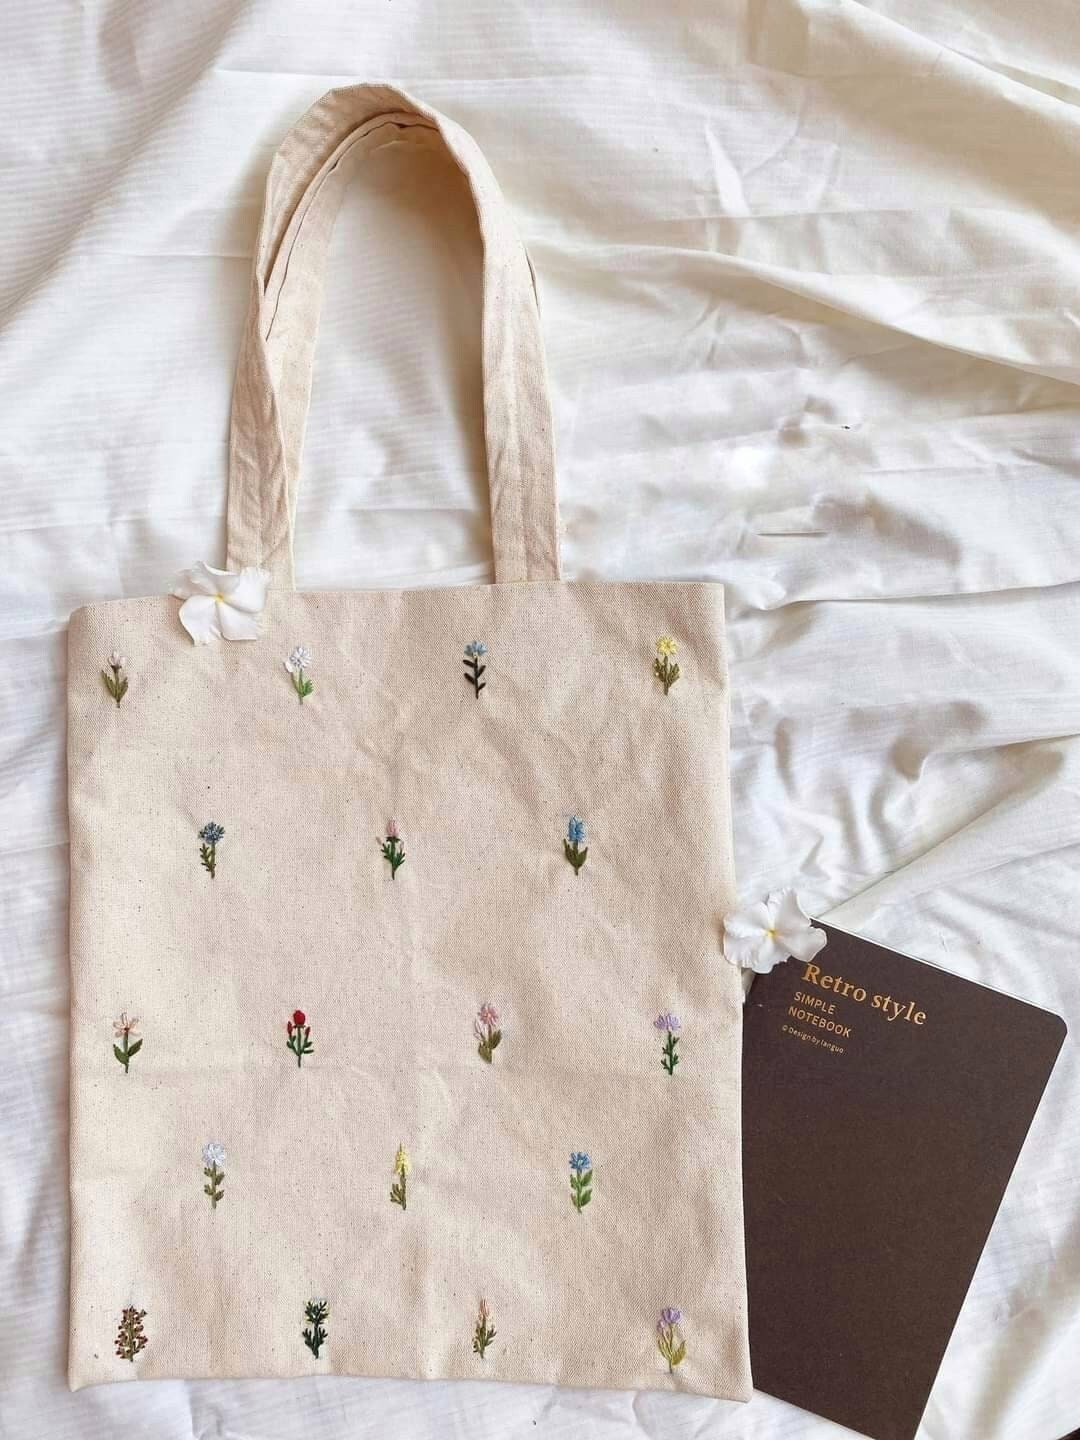 Flower Art Canvas Bag With Pocket and Mini Flowers Embroidery